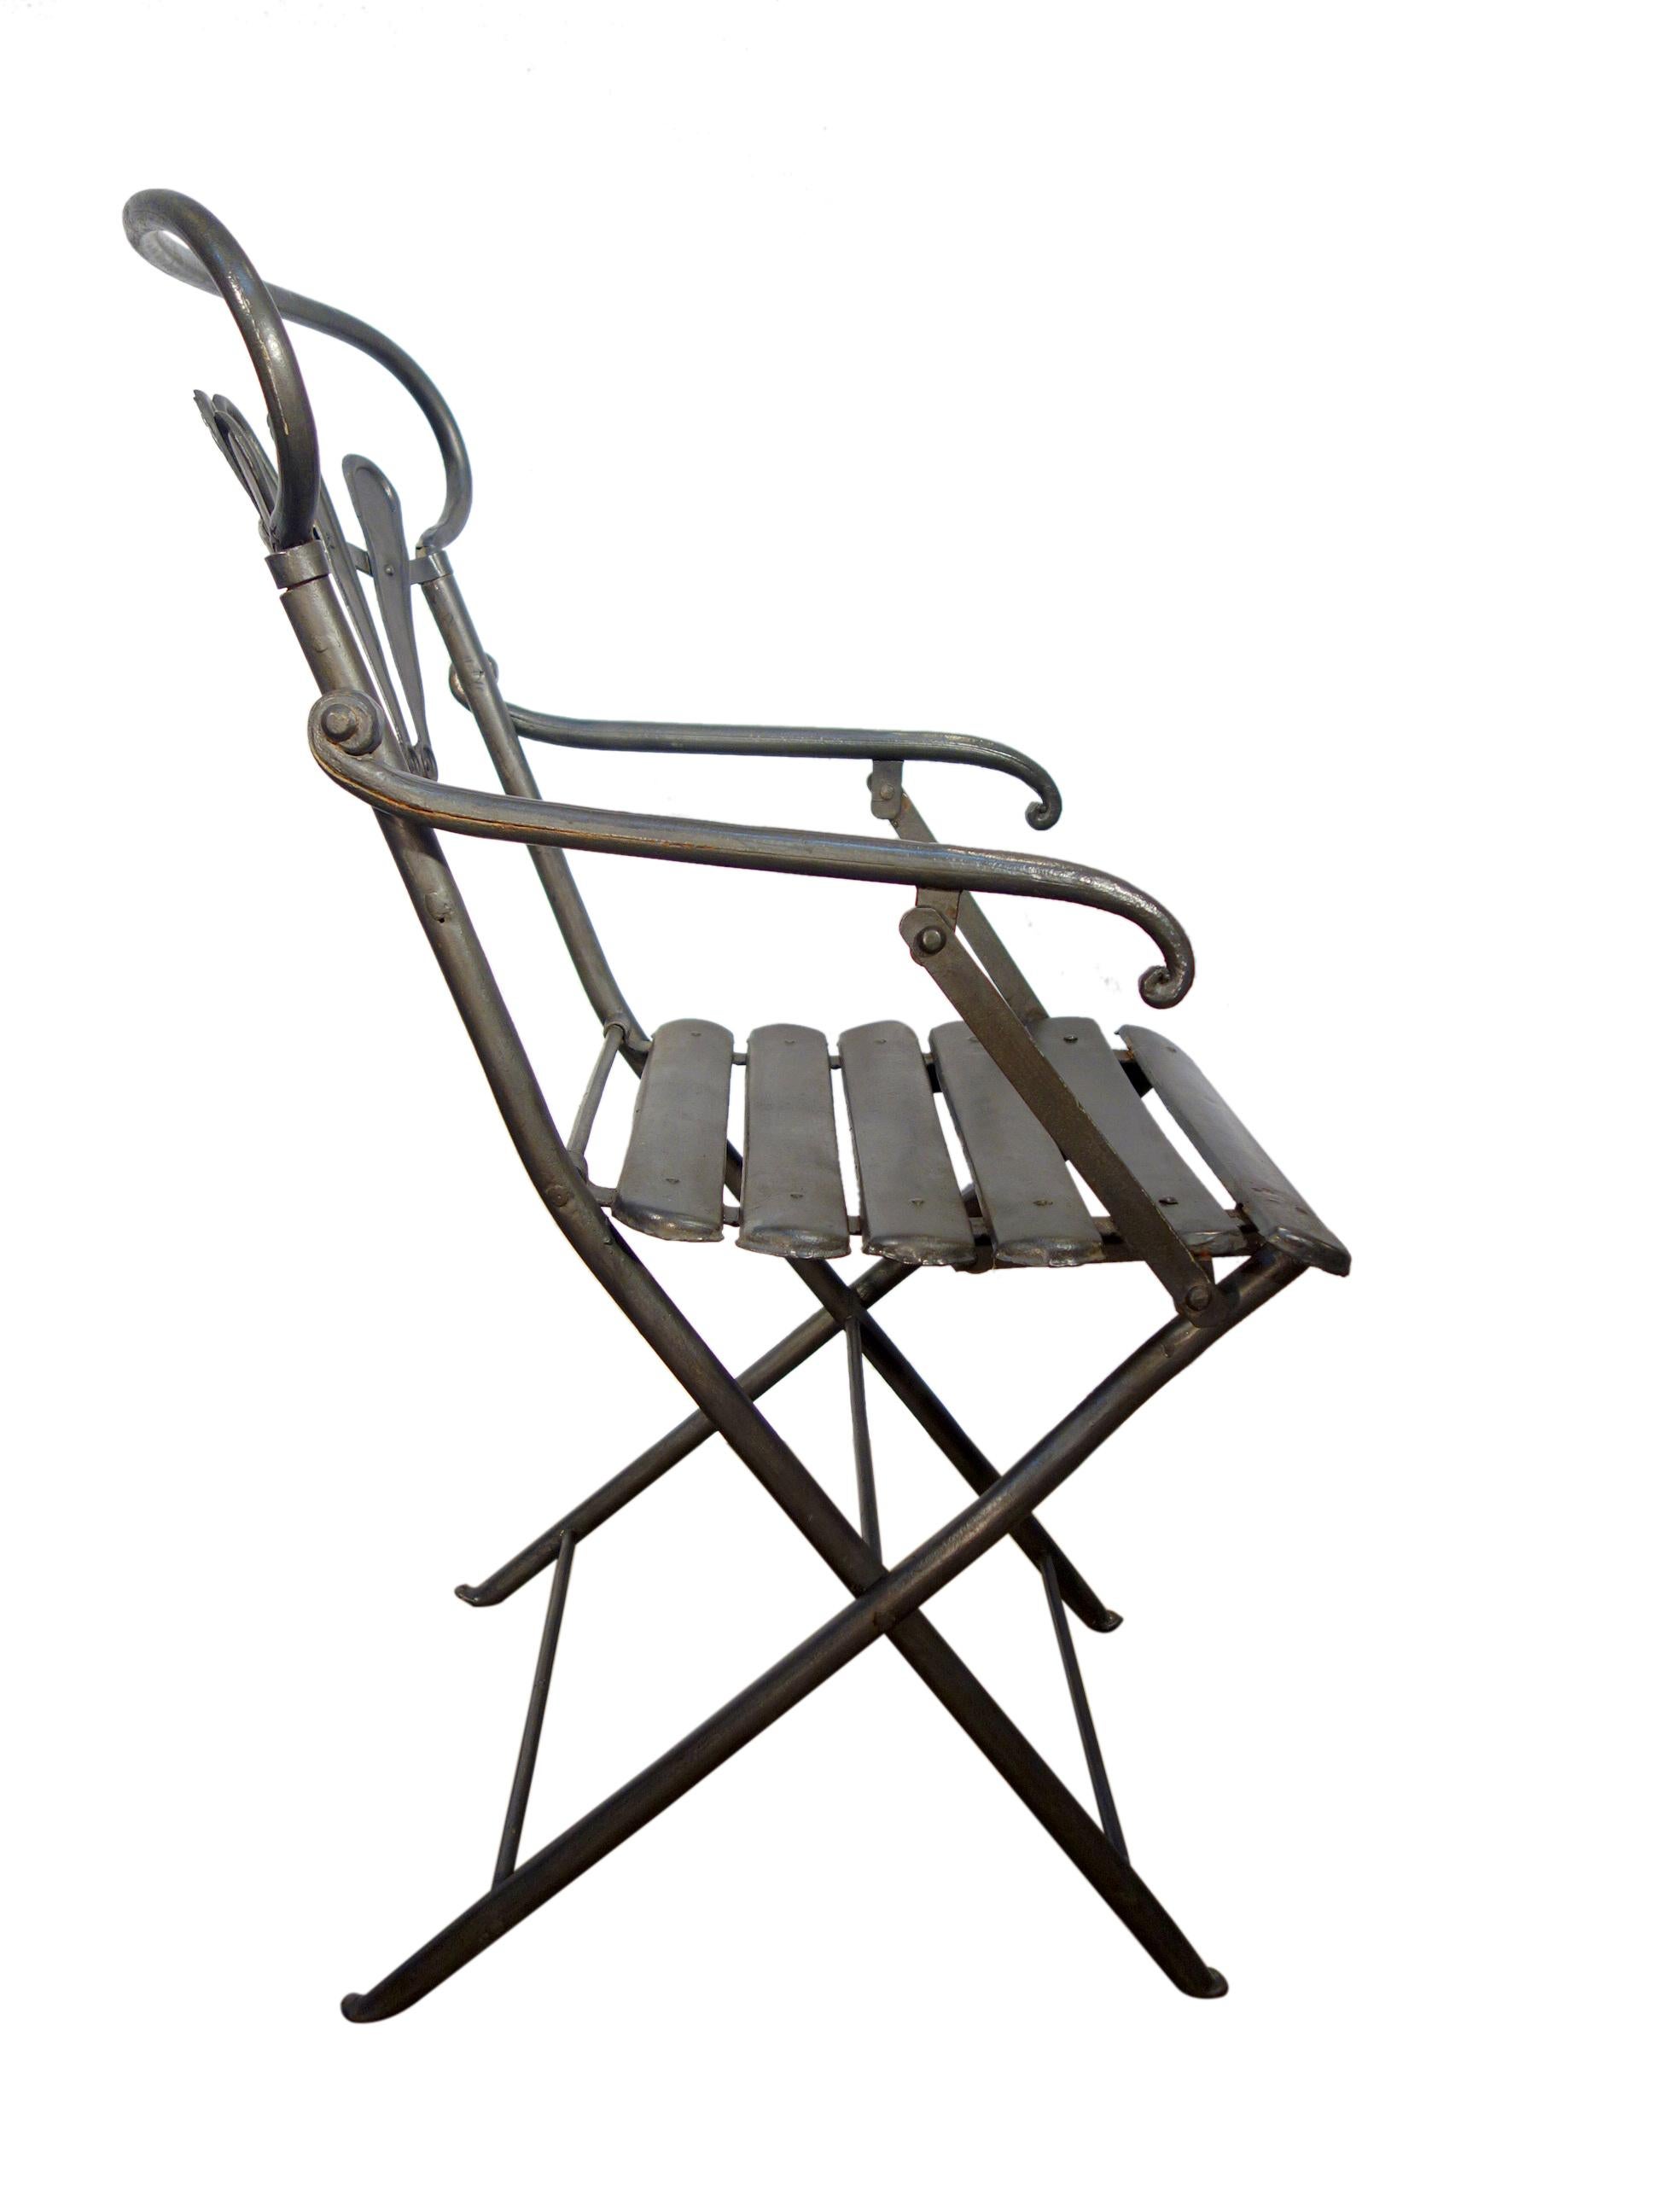 Early Mid Century Italian Wrought Iron Folding Armchair Pair by Carlo Crespi In Good Condition For Sale In Encinitas, CA